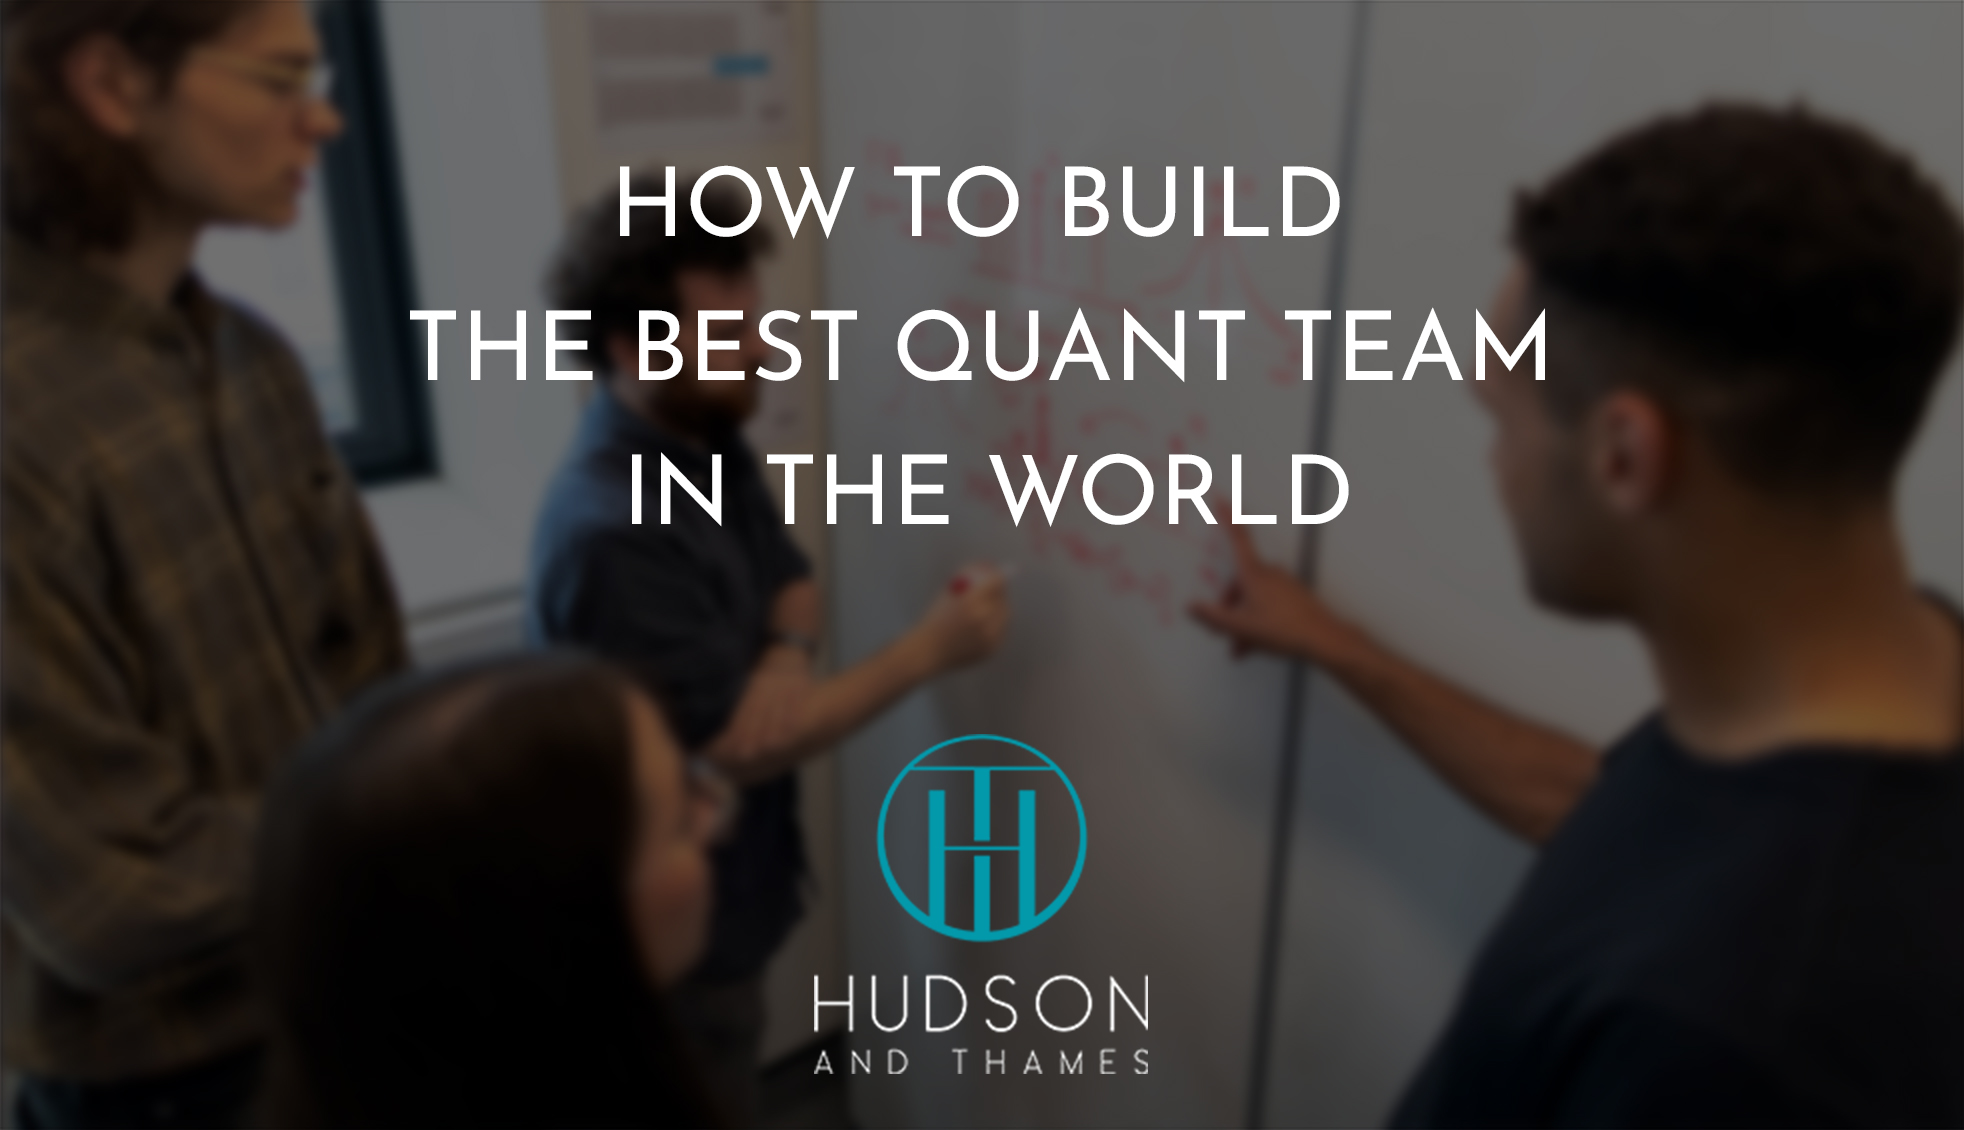 How to Build the Best Quant Team in the World